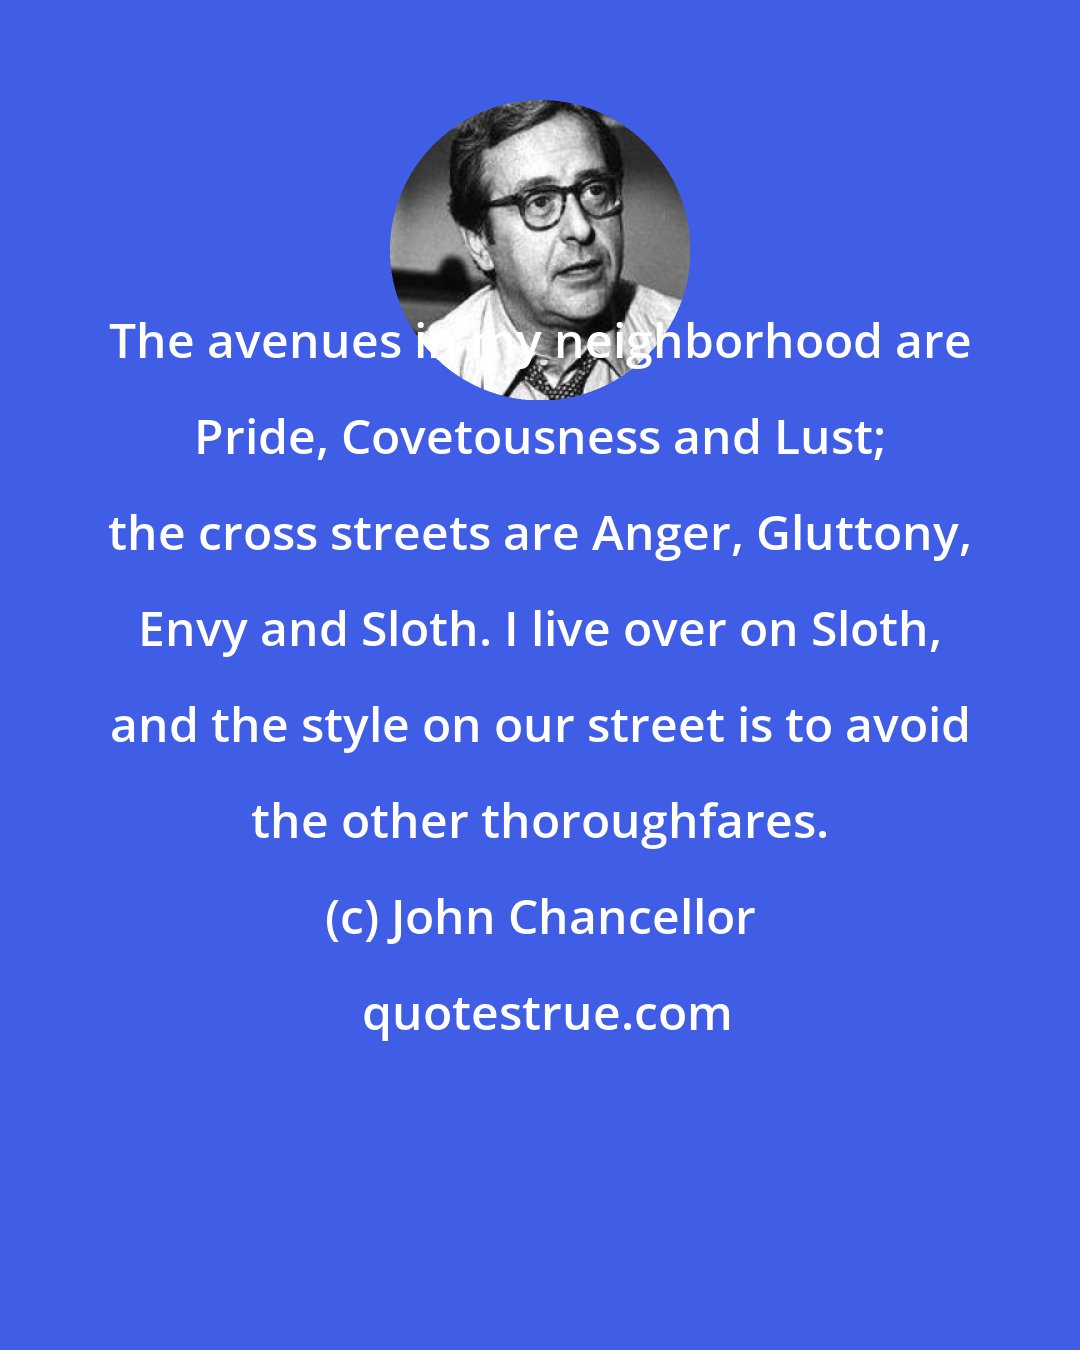 John Chancellor: The avenues in my neighborhood are Pride, Covetousness and Lust; the cross streets are Anger, Gluttony, Envy and Sloth. I live over on Sloth, and the style on our street is to avoid the other thoroughfares.